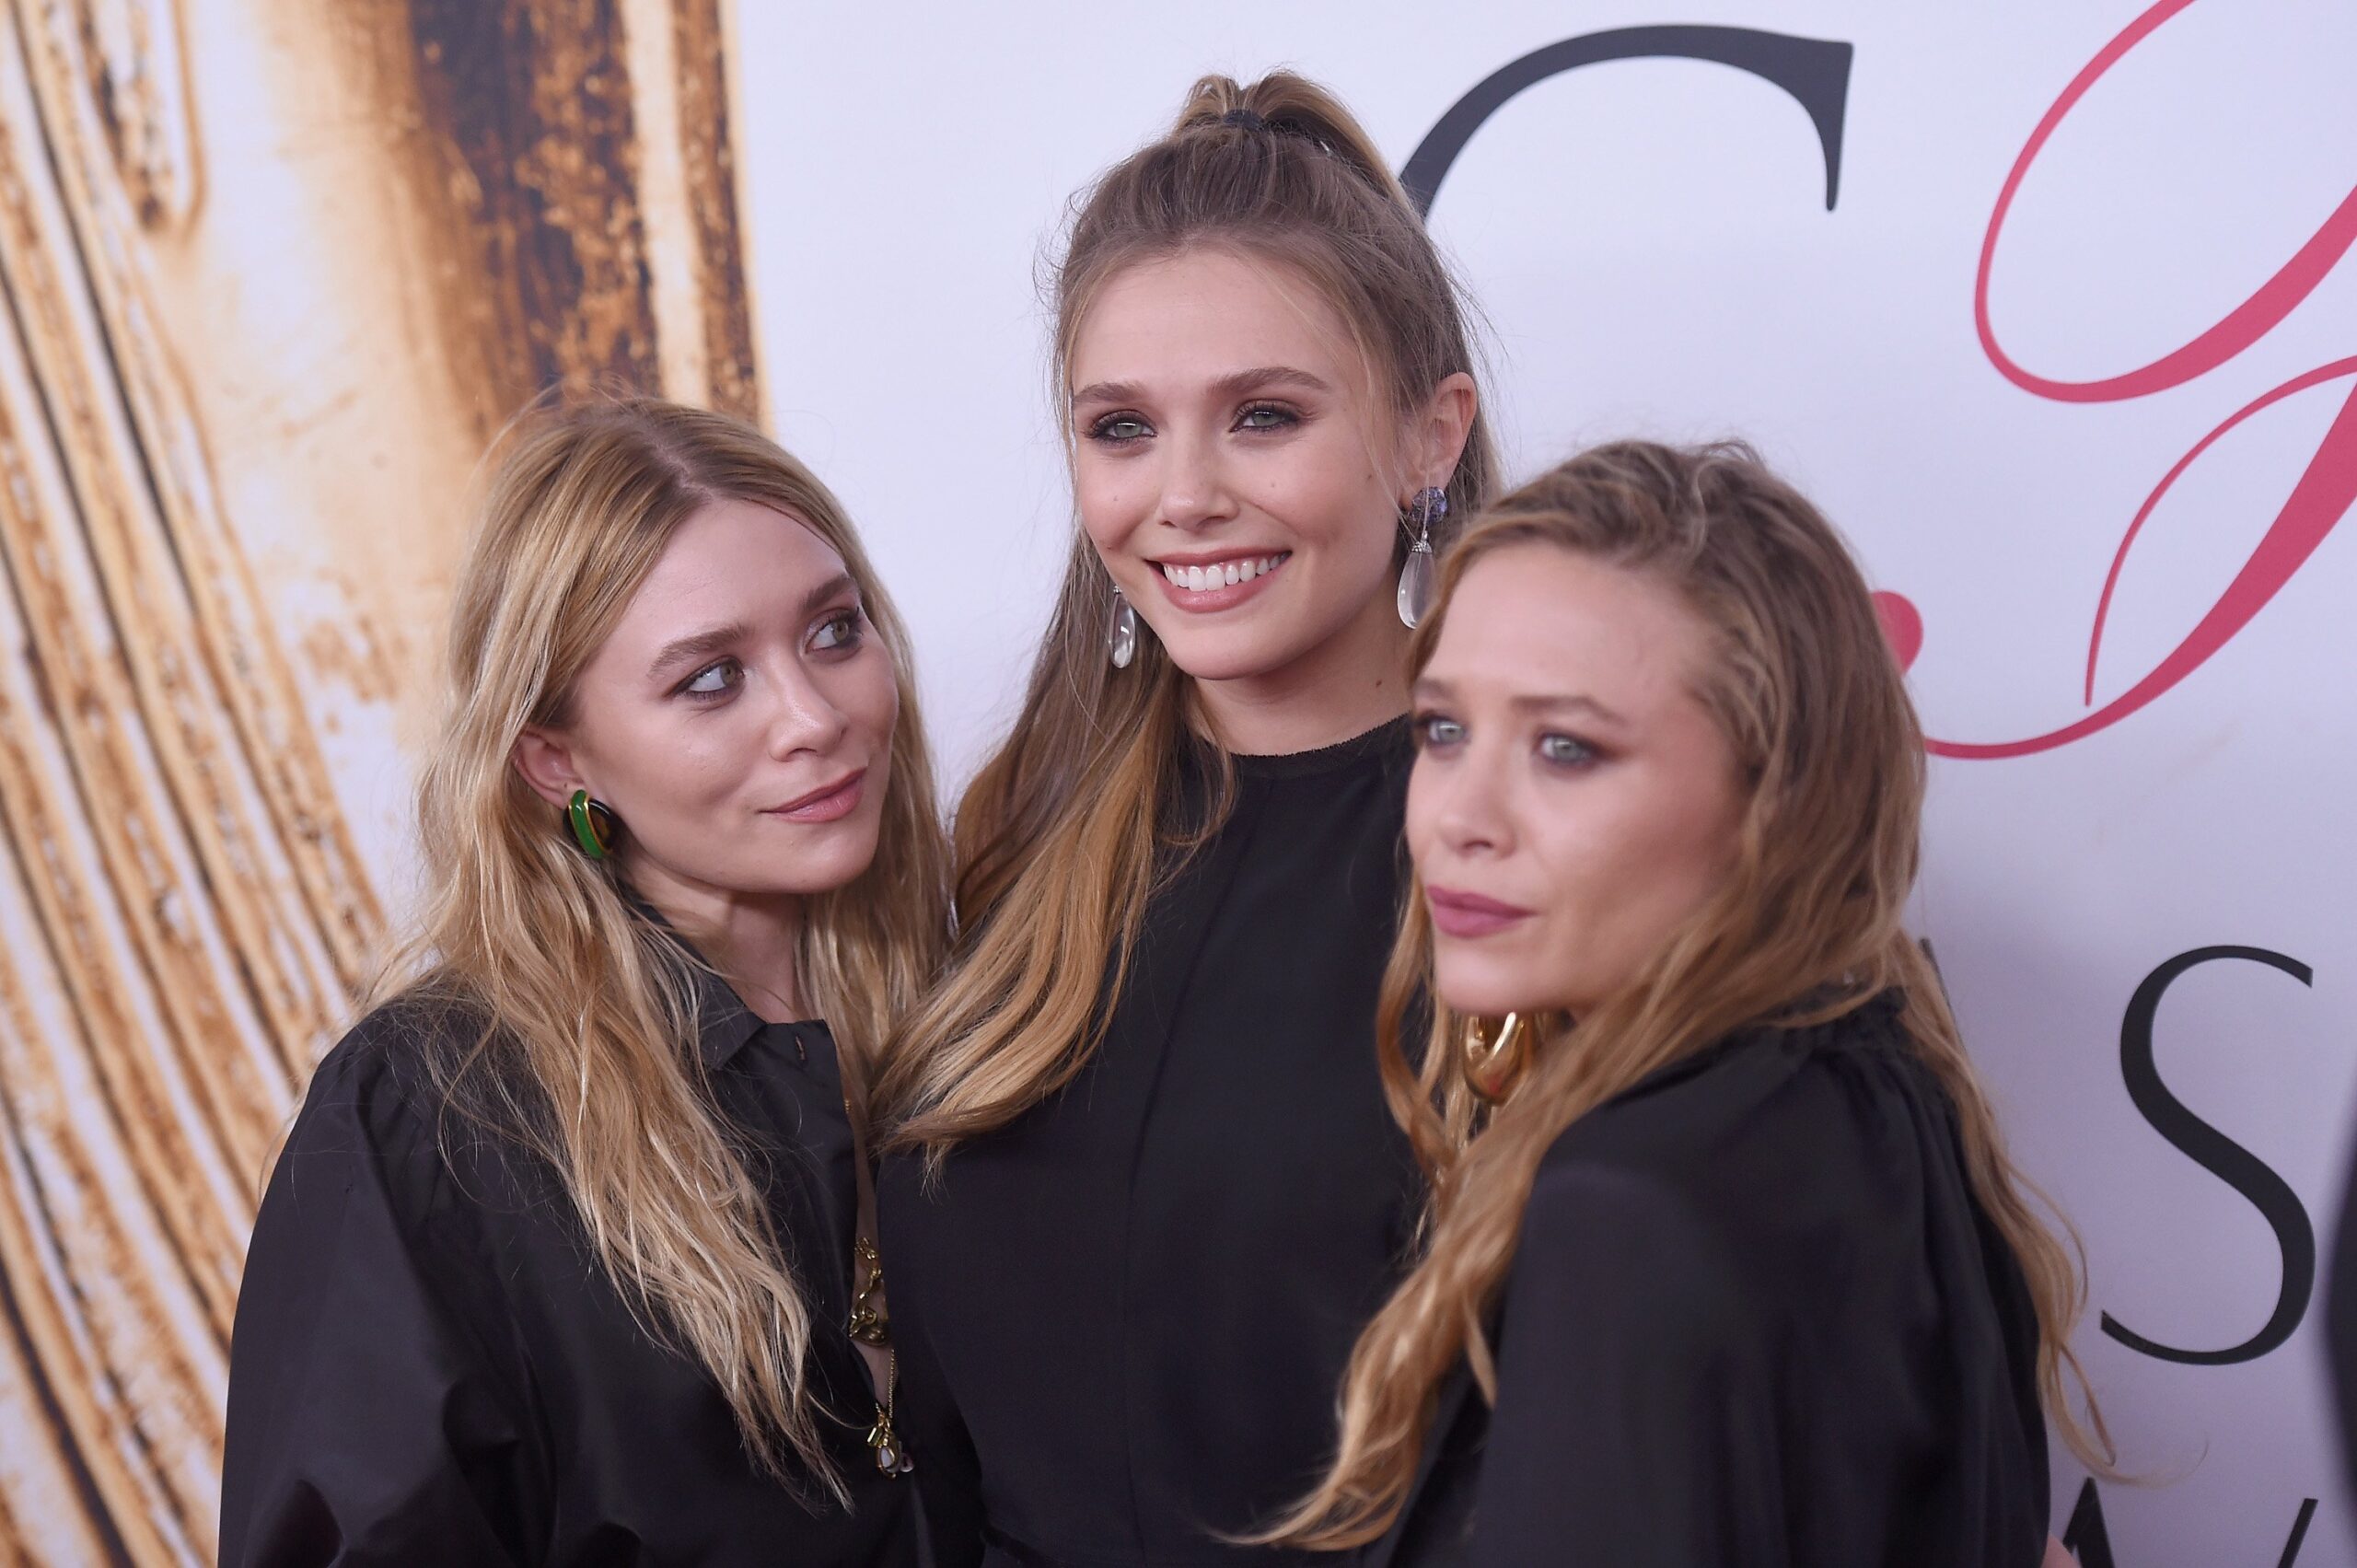 Elizabeth, Mary-Kate, and Ashley Olsen at the 2016 CFDA Fashion Awards on June 6, 2016, in New York City | Source: Getty Images